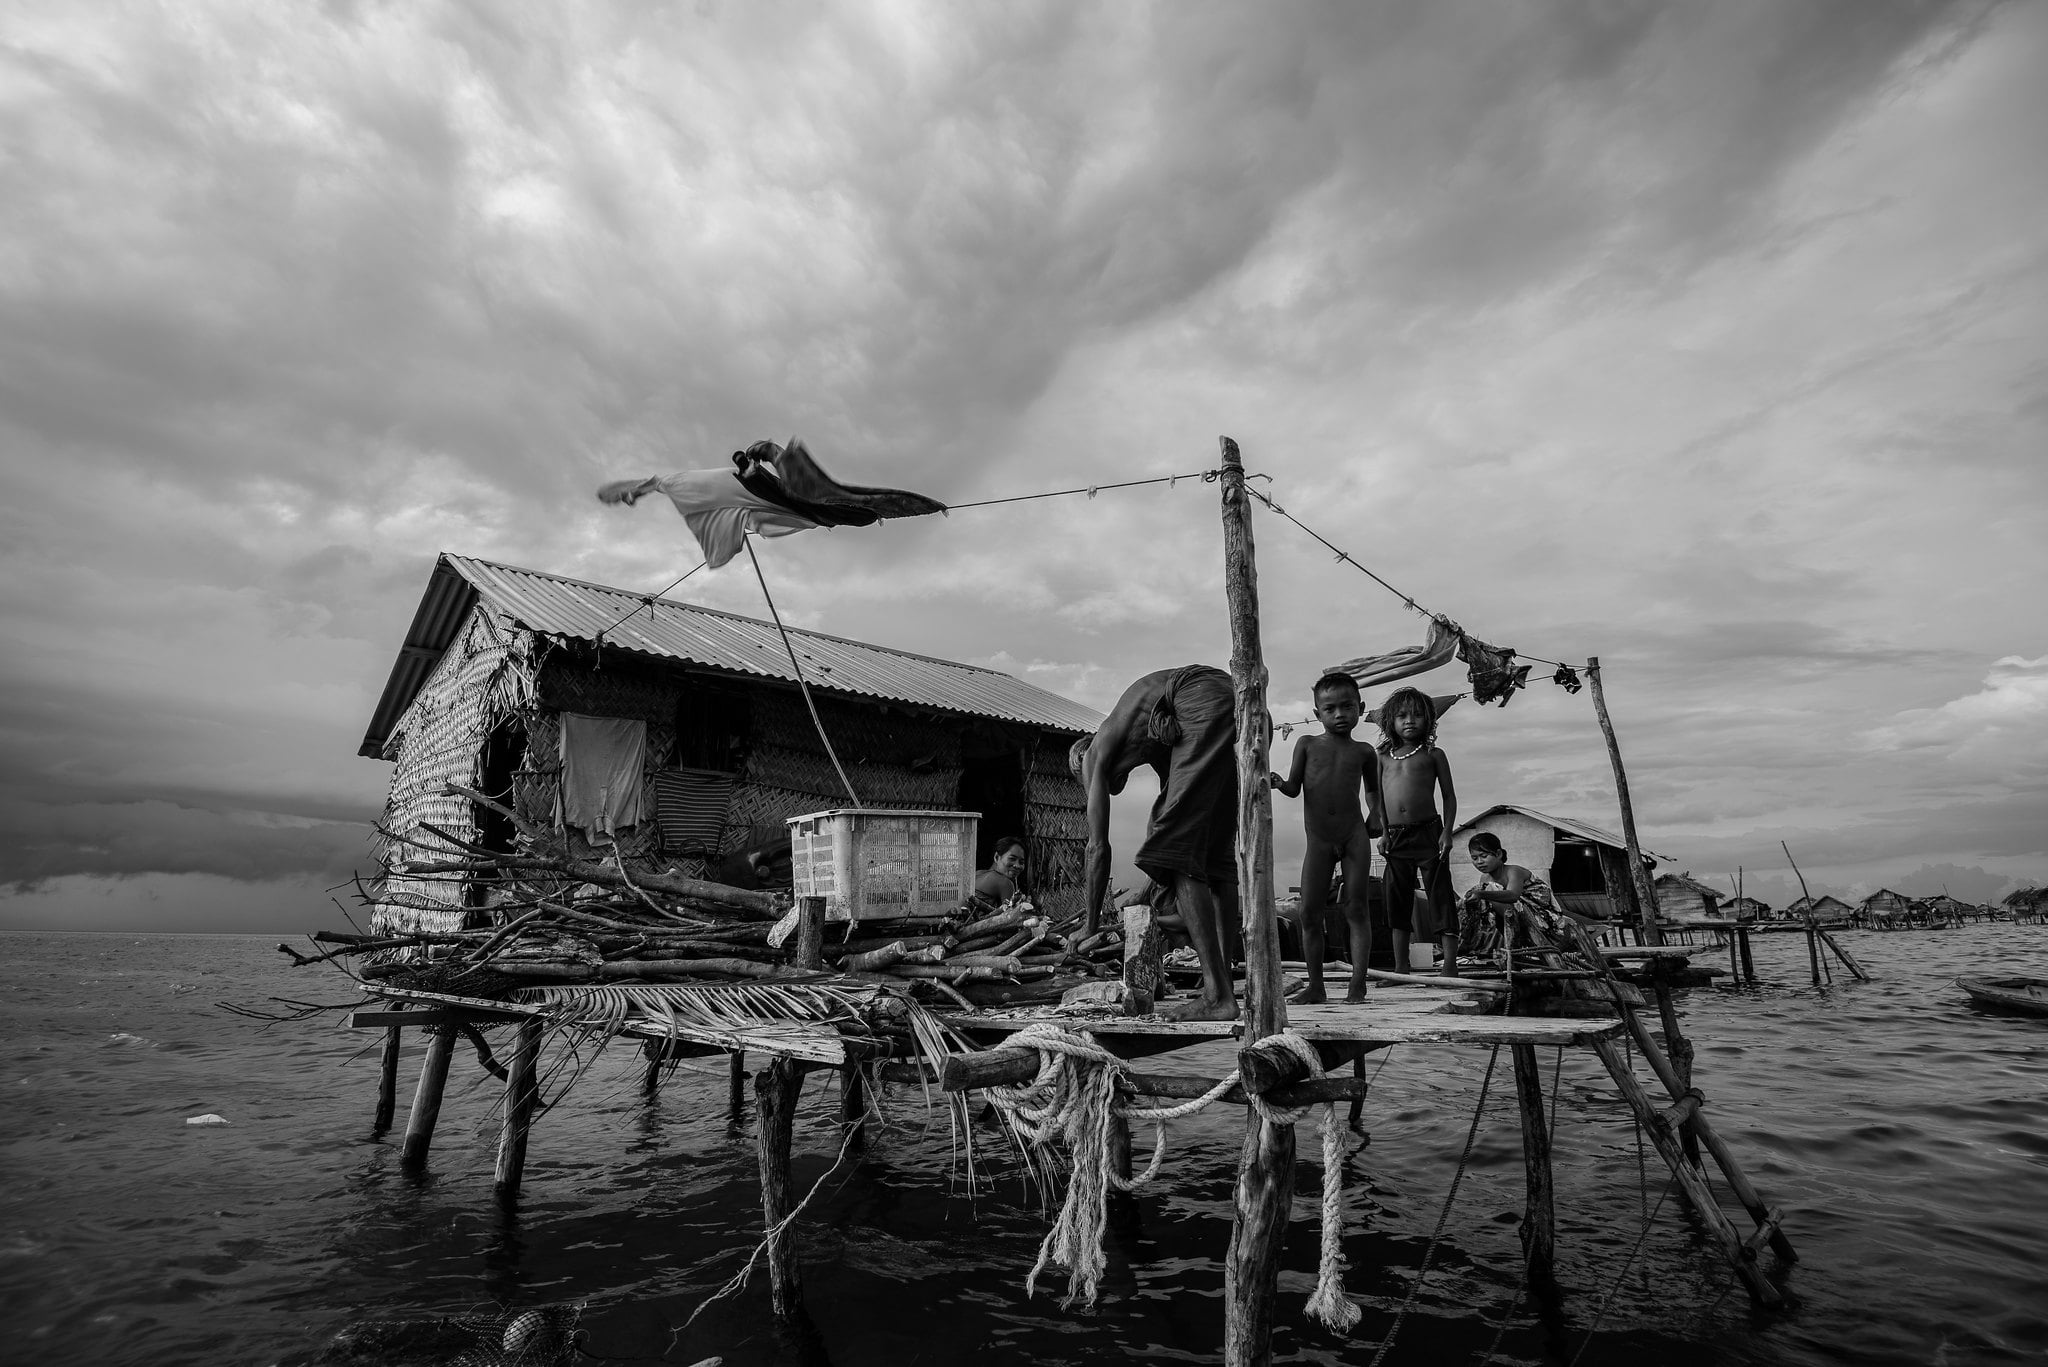 three Bajua sea nomads stand on their floating home 